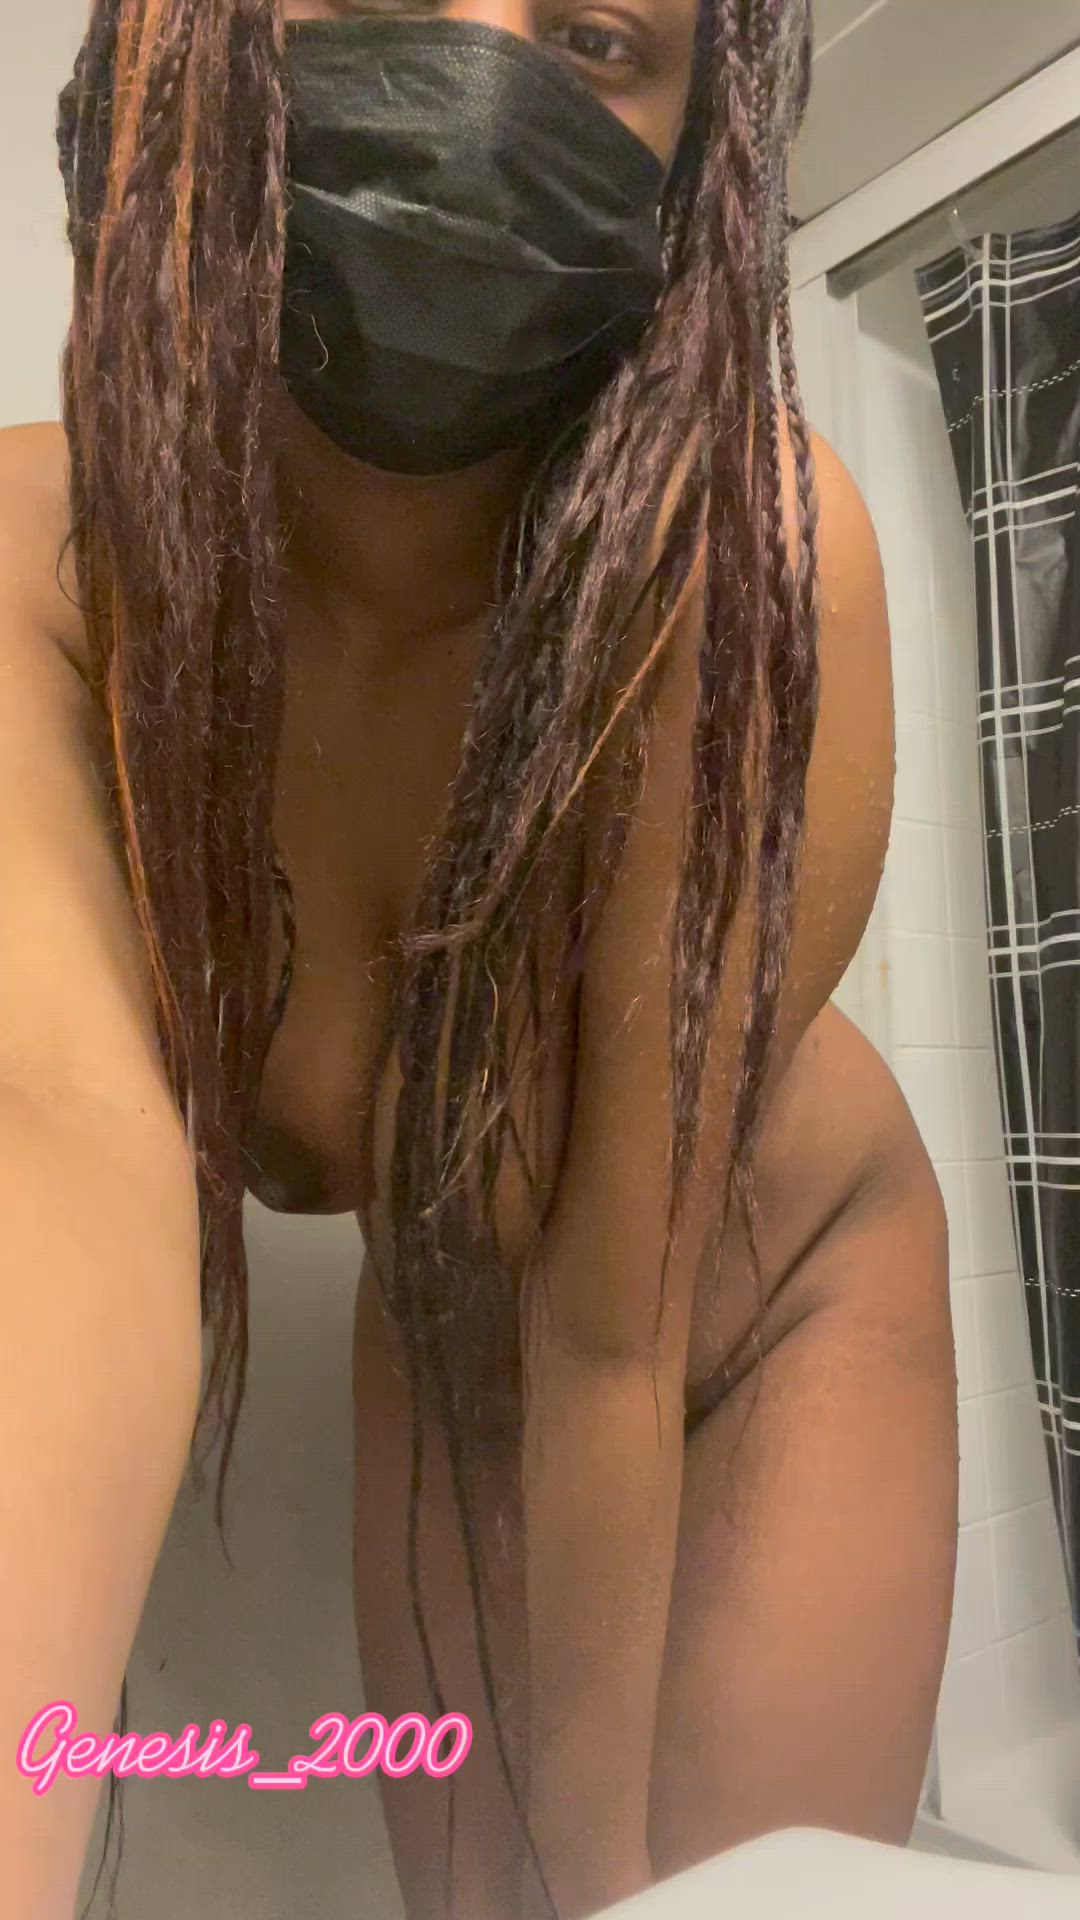 Tits porn video with onlyfans model Genesis_2000 <strong>@genesis_2000</strong>